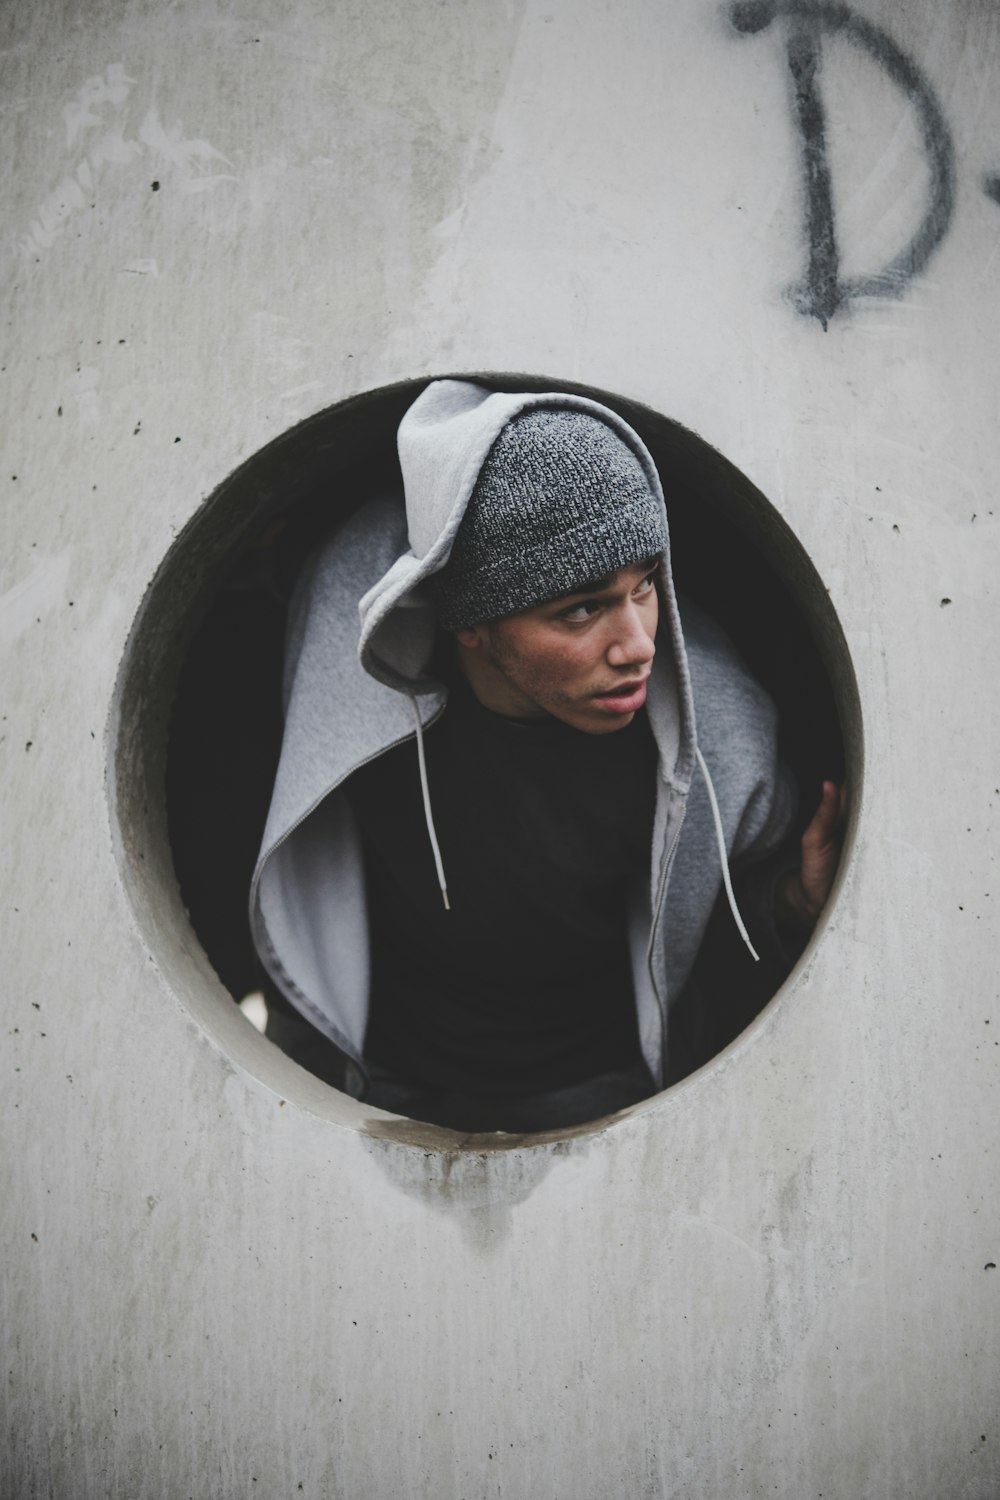 man wearing black shirt and knit cap with hoodie jacket inside concrete hole